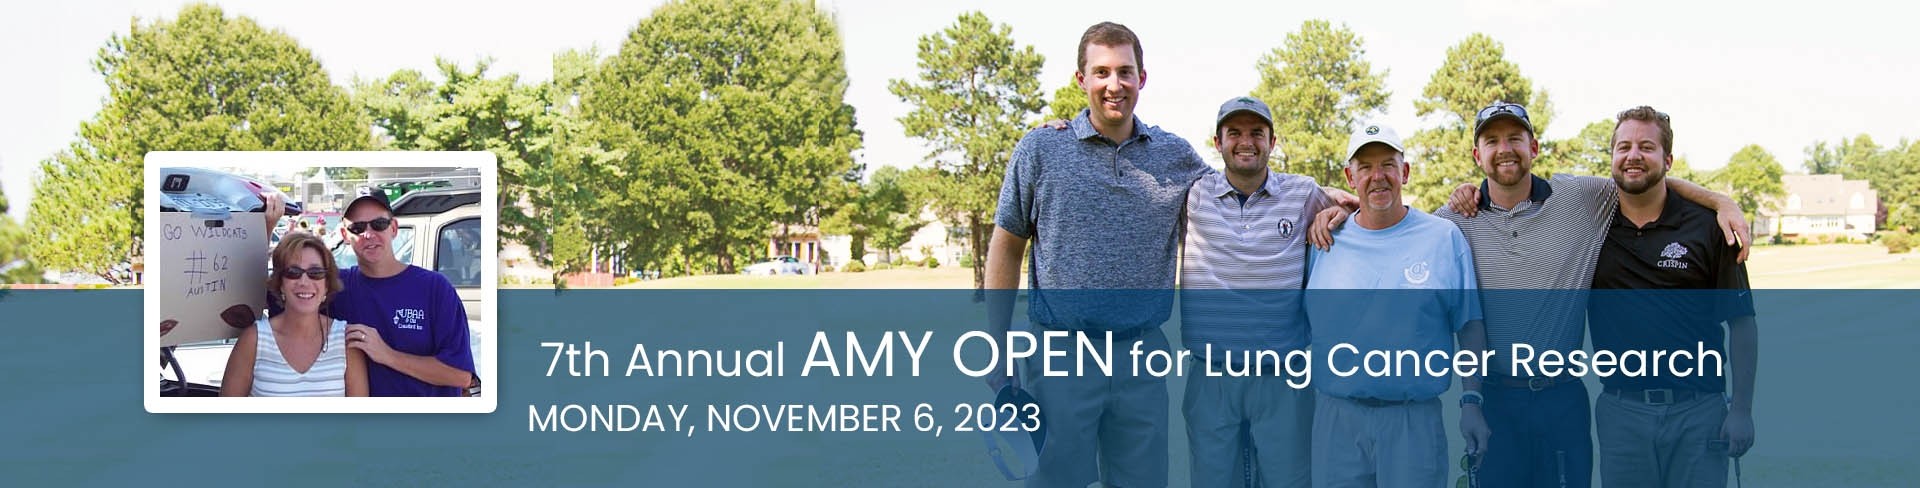 7th Annual Amy Open